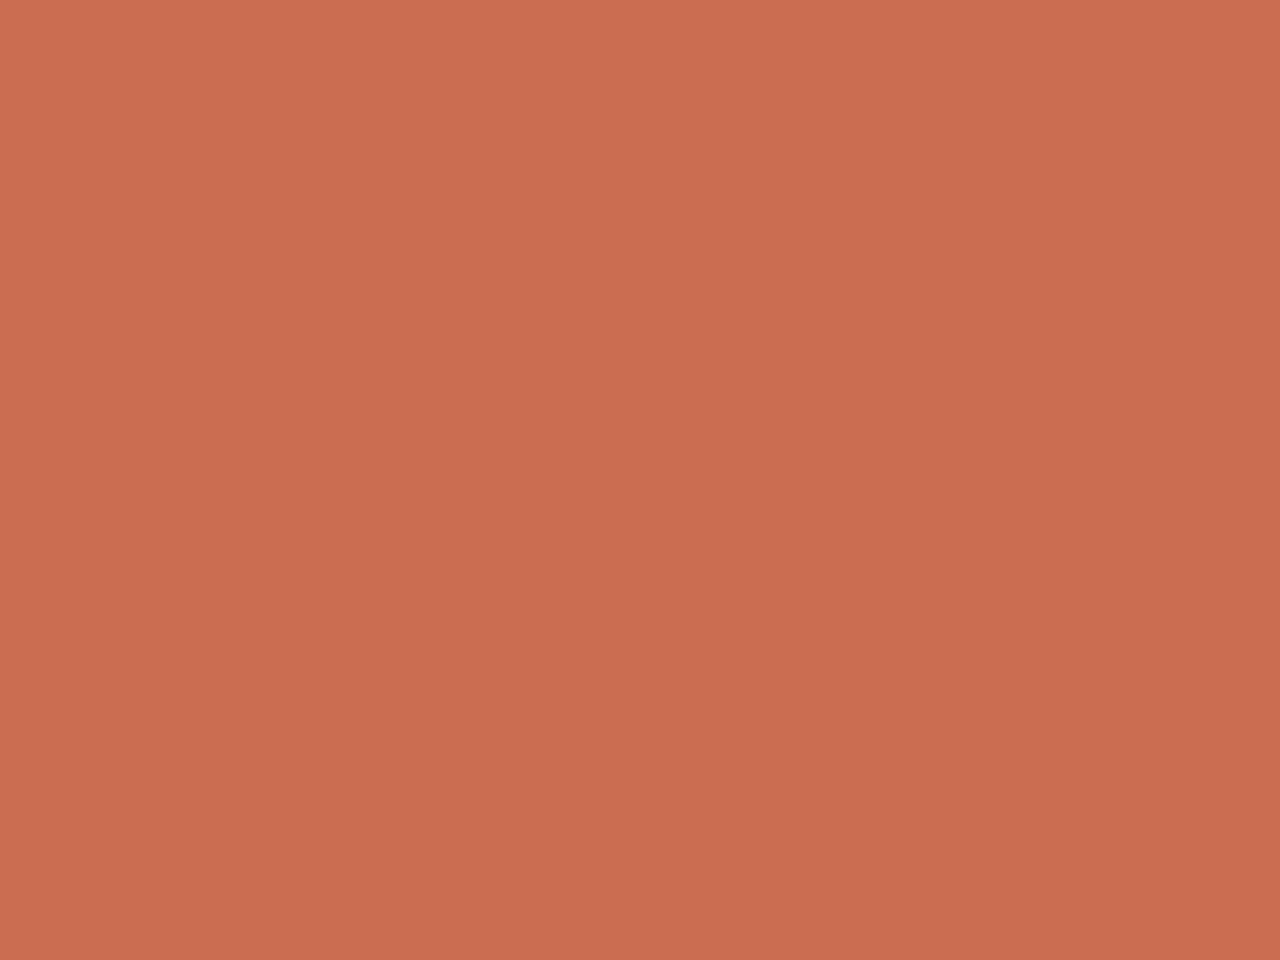 1280x960 Copper Red Solid Color Background